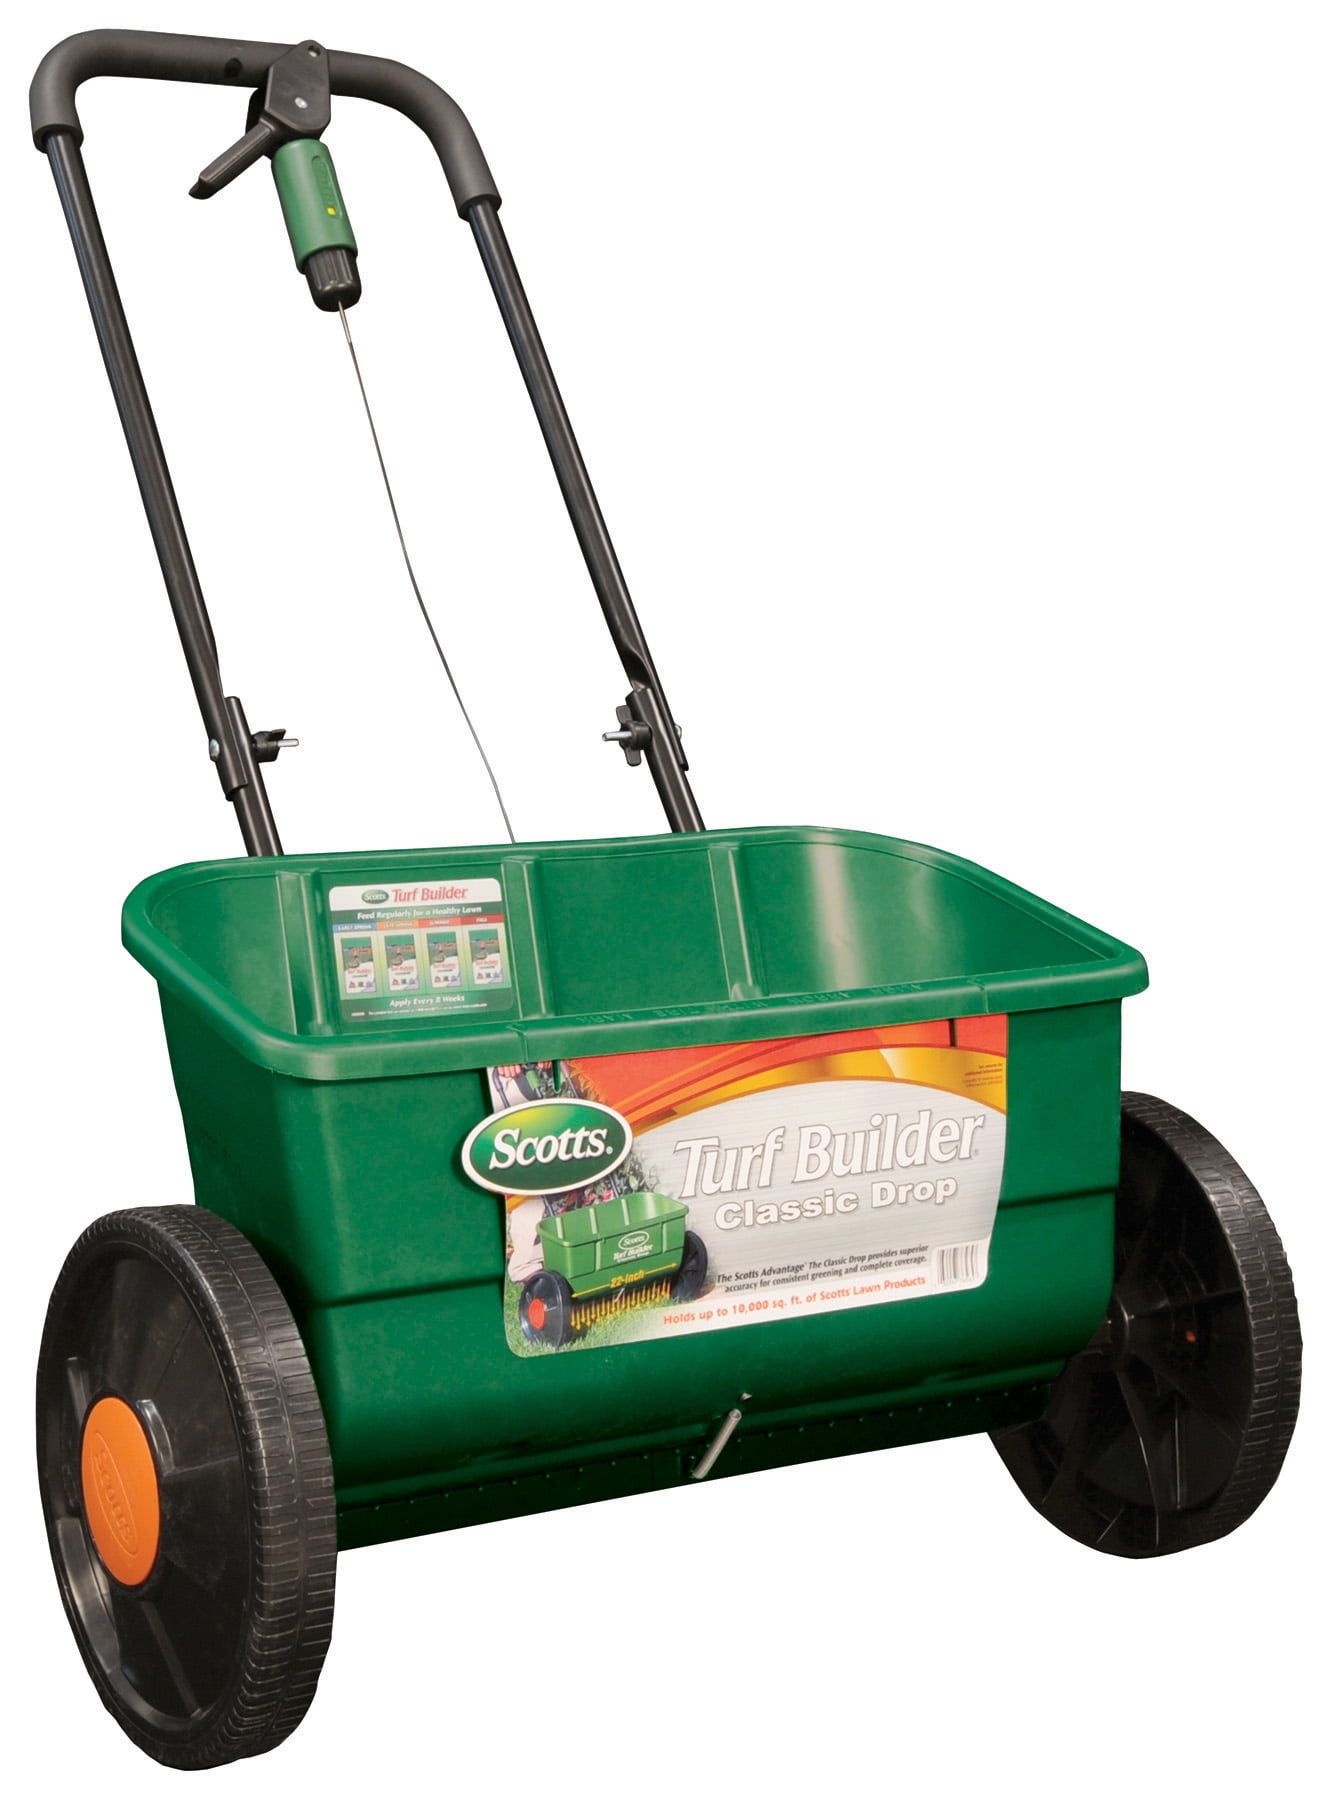 How To Use Scotts Turf Builder Spreader Scotts Turf Builder Classic Drop Spreader - Walmart.com